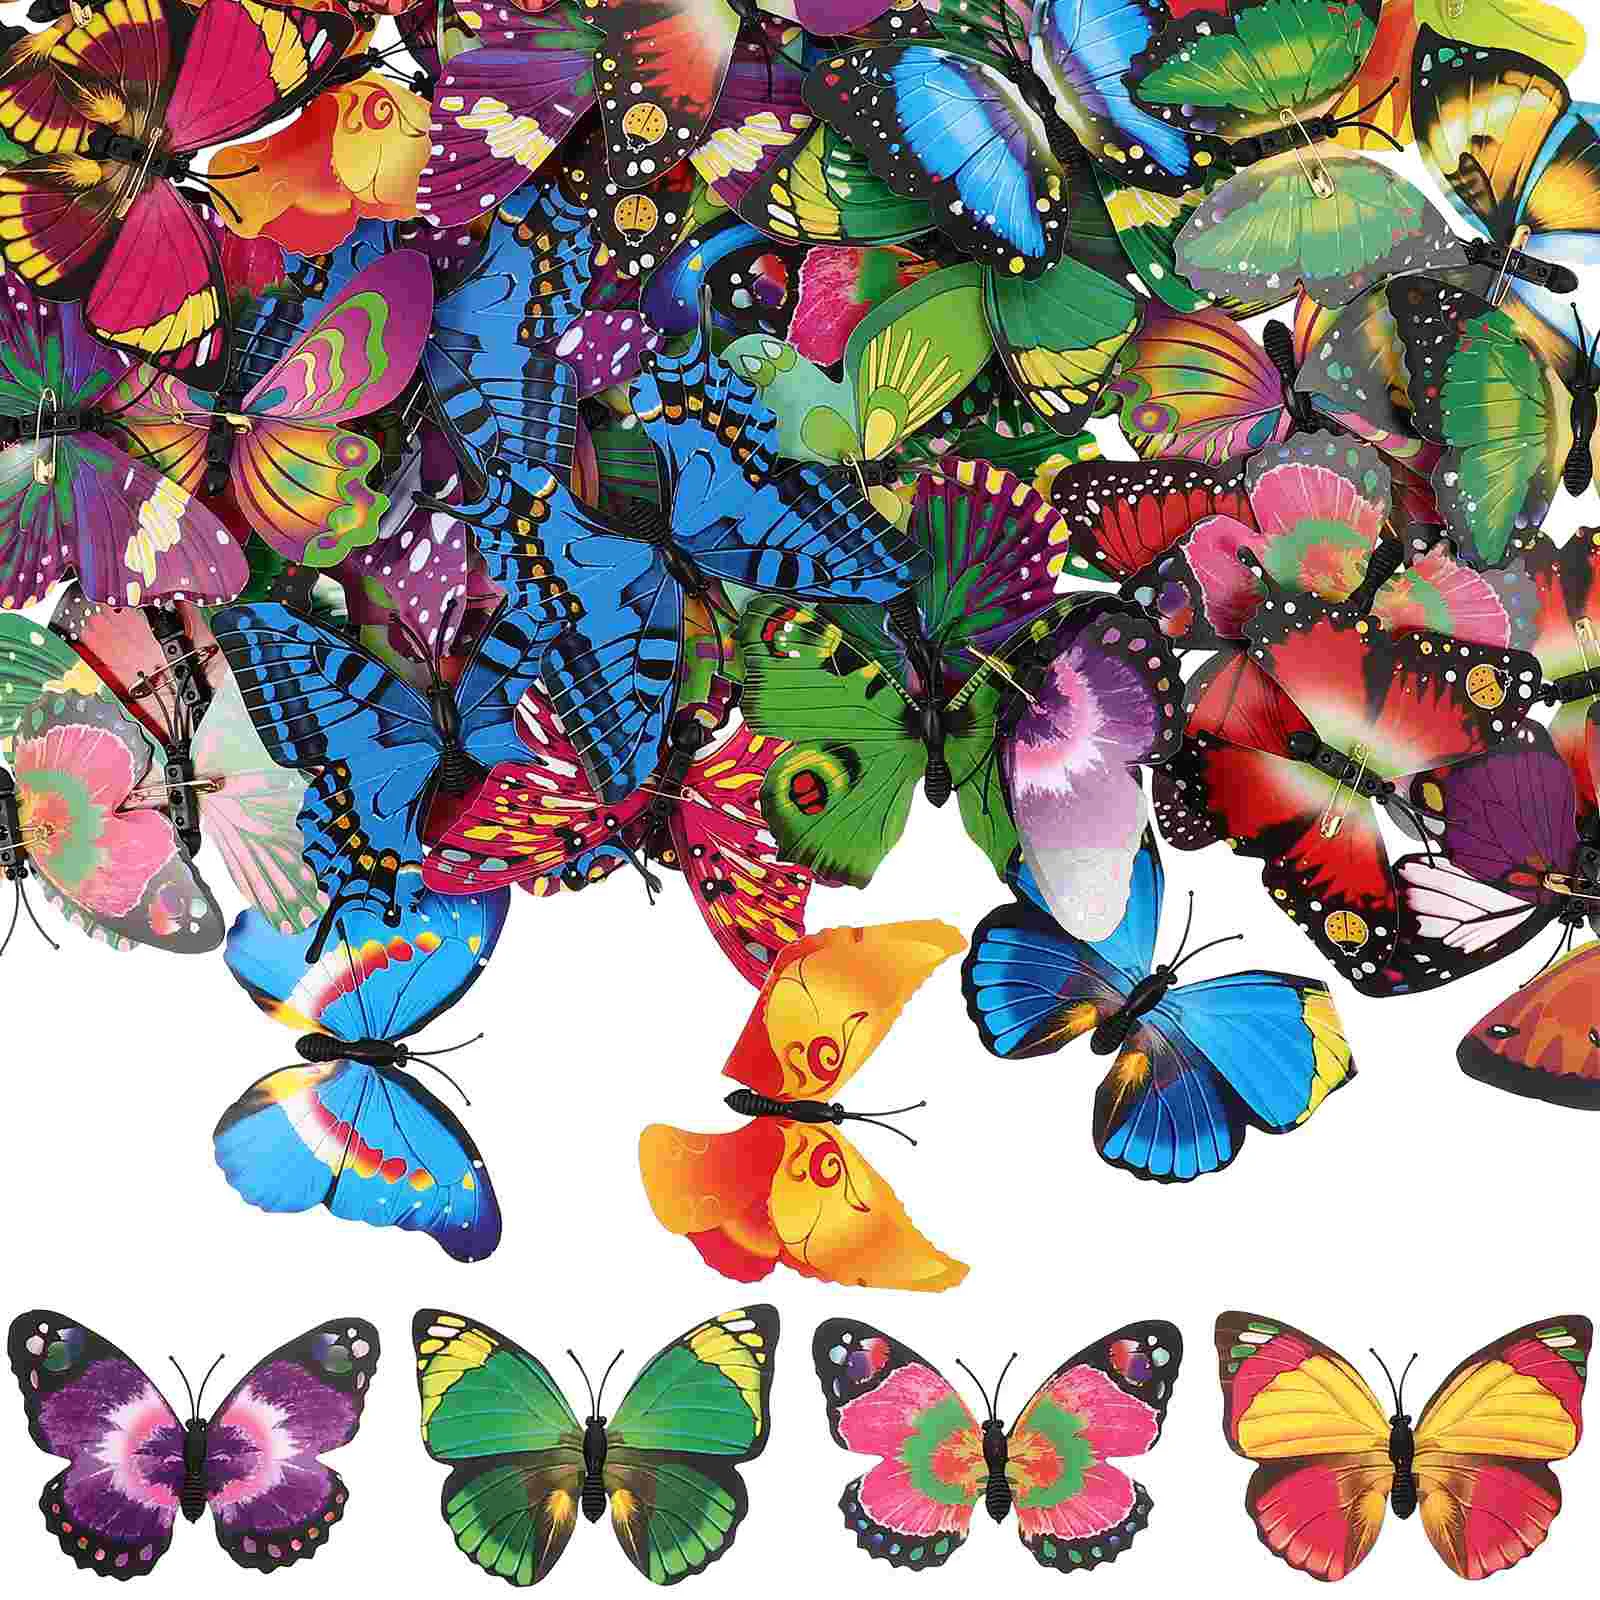 

100 Pcs Crystal Decor Pin Butterfly Coat Brooch Rhinestones Clothes Butterflies Brooches Pvc Insect Lapel Collar Miss